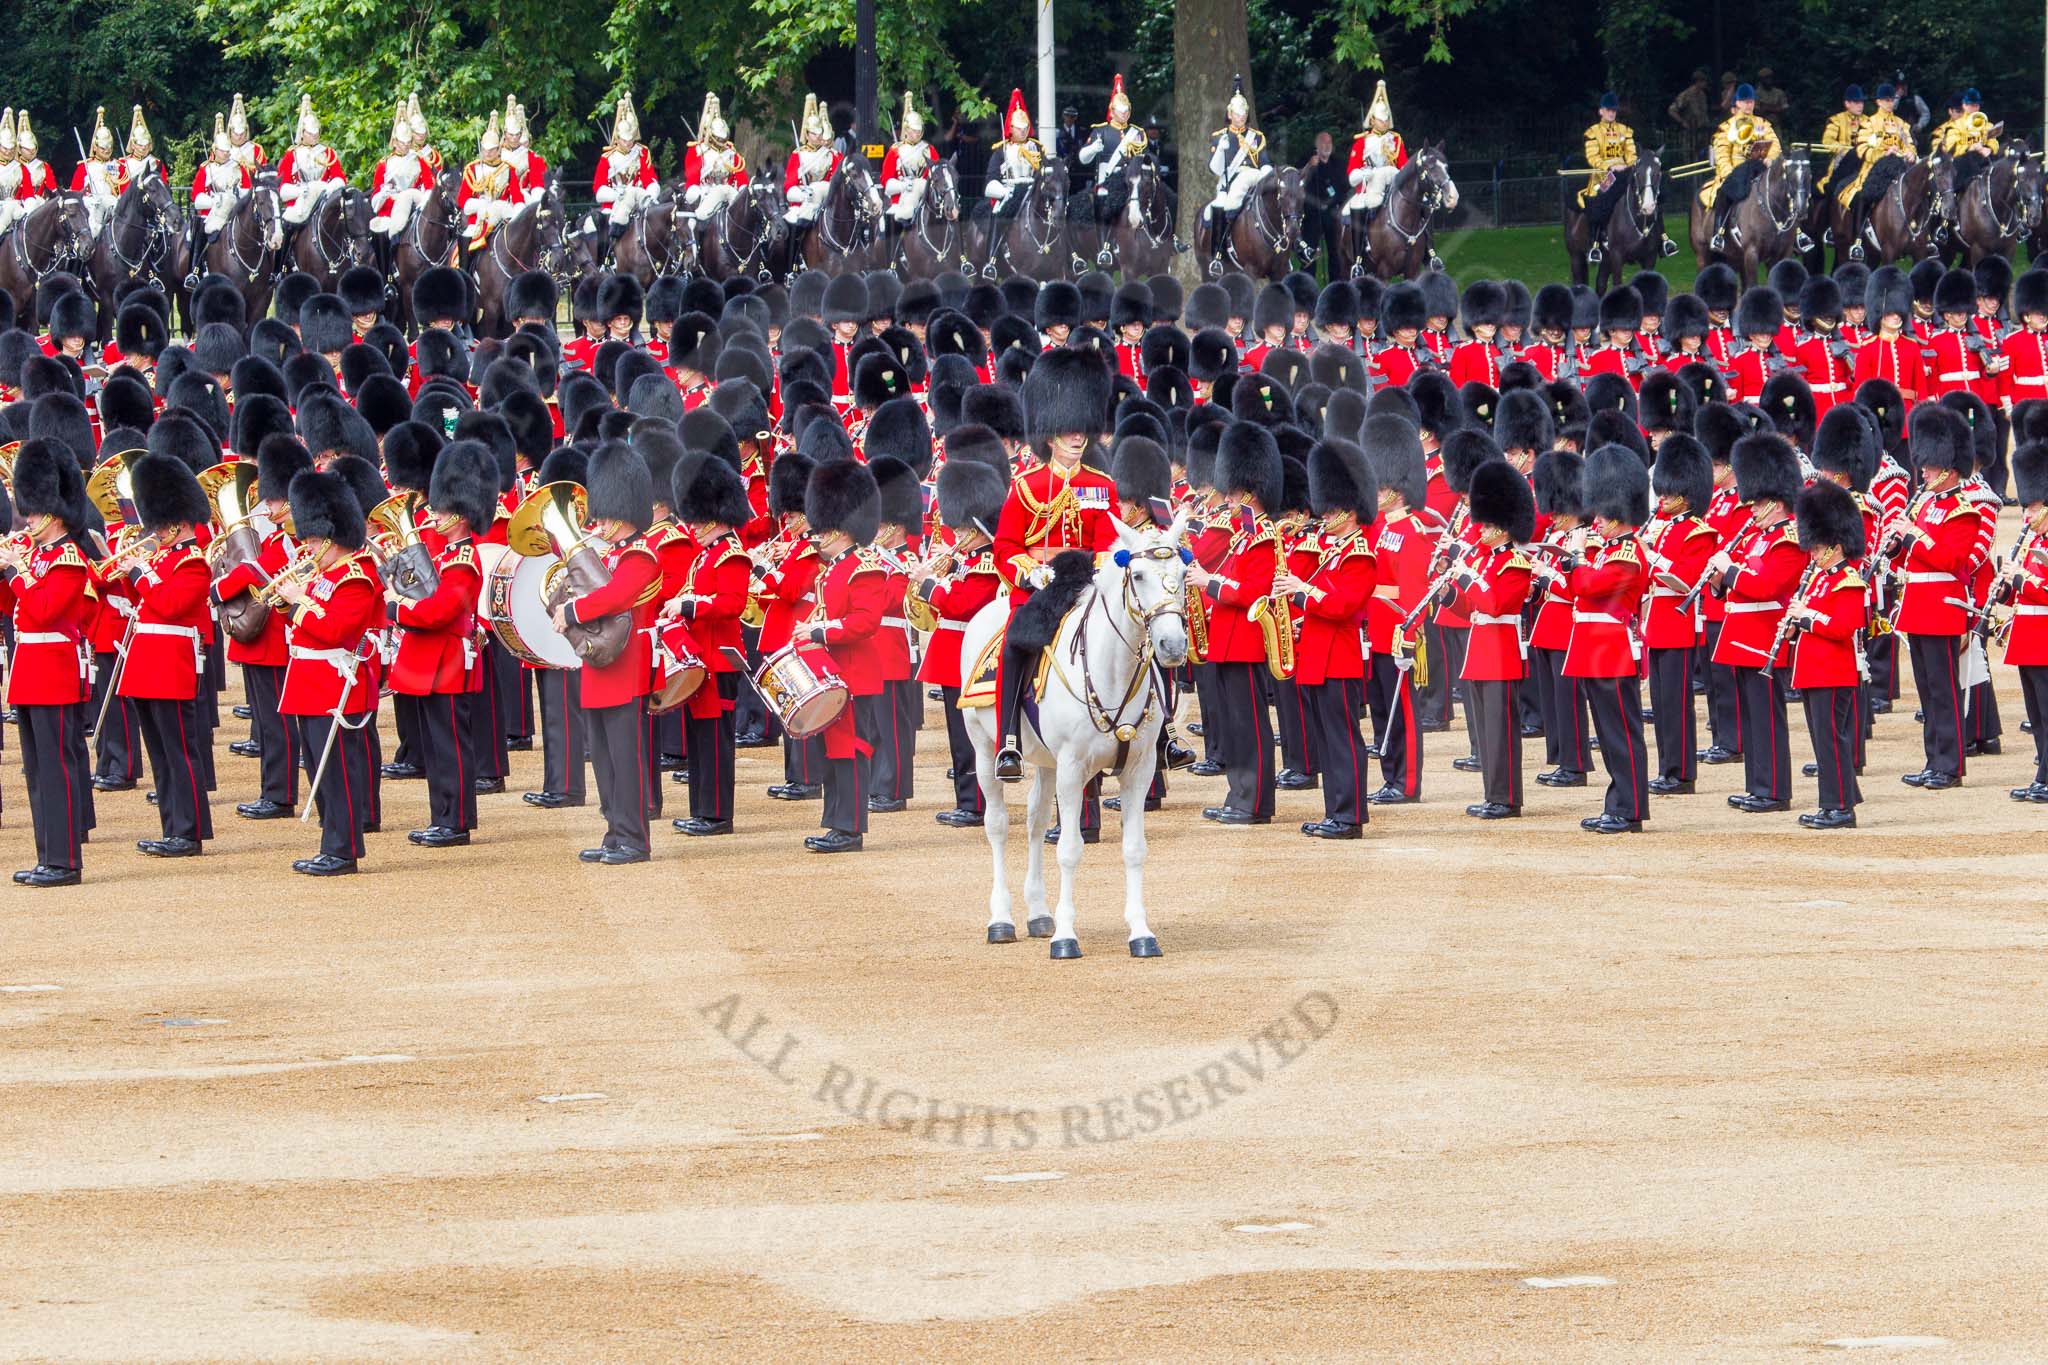 Trooping the Colour 2014.
Horse Guards Parade, Westminster,
London SW1A,

United Kingdom,
on 14 June 2014 at 11:25, image #554